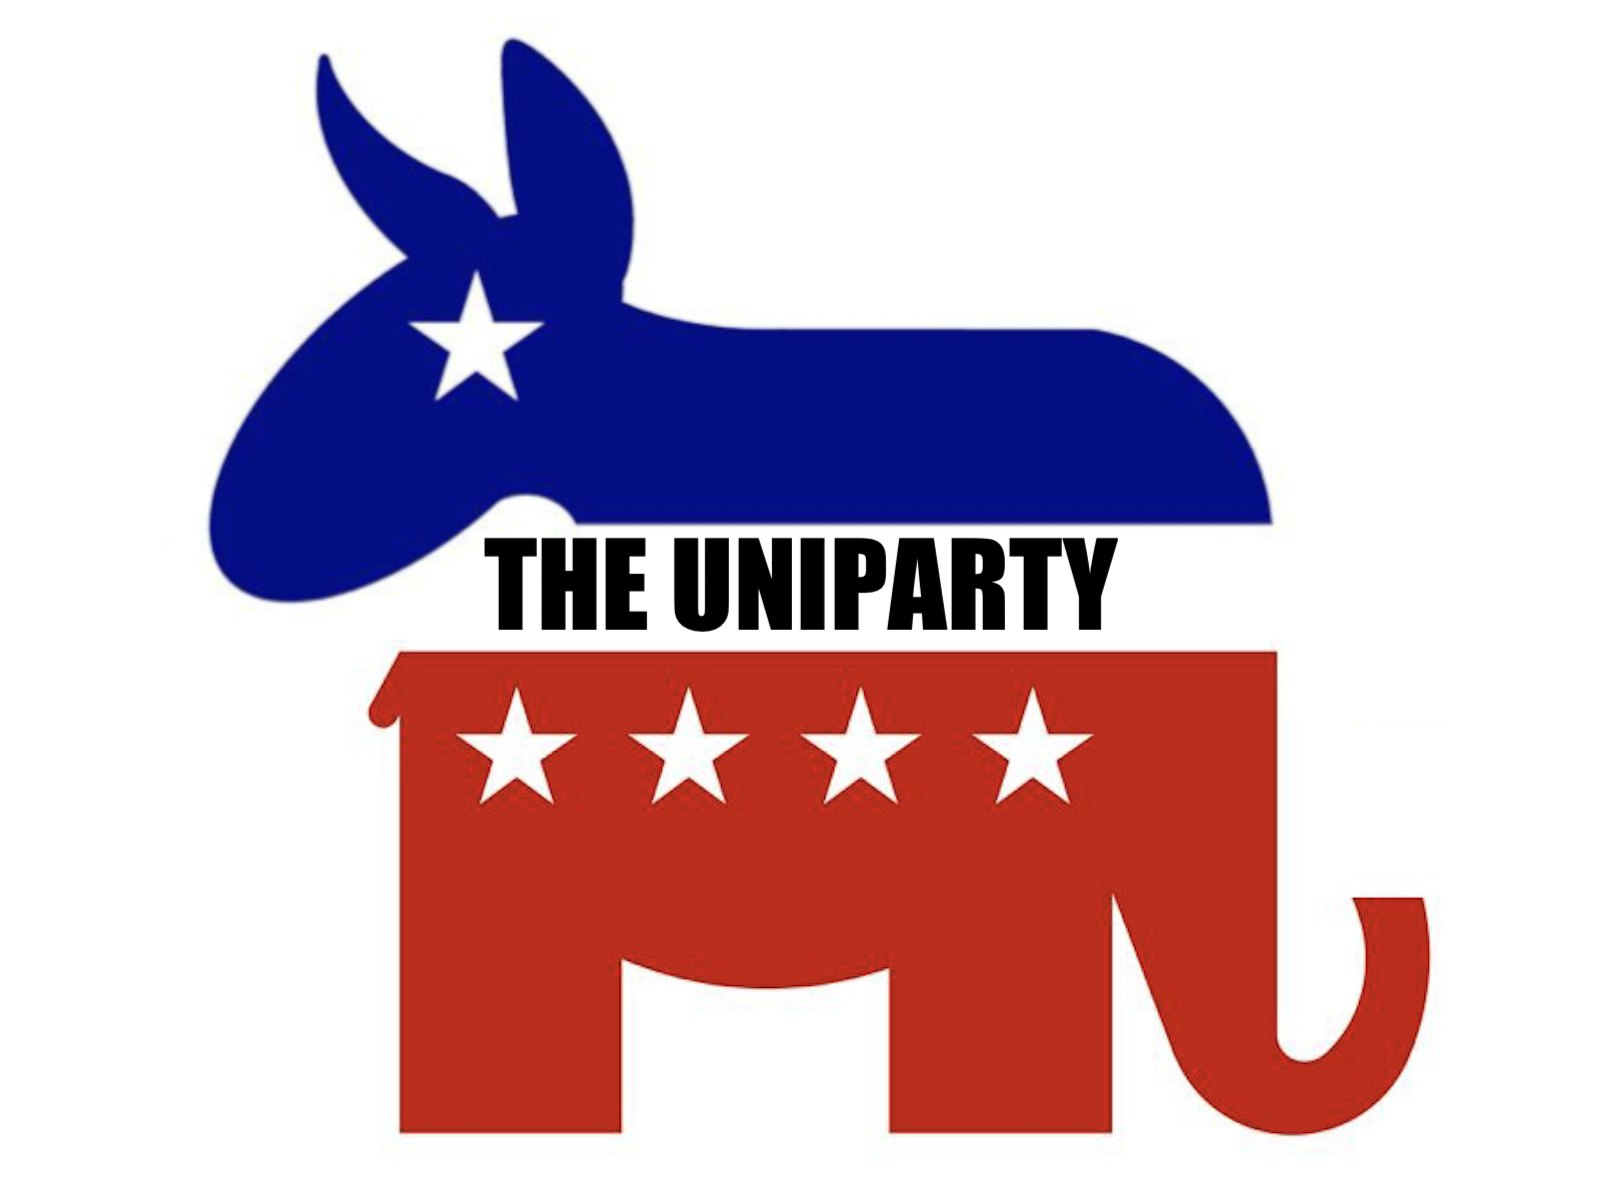 The Uniparty